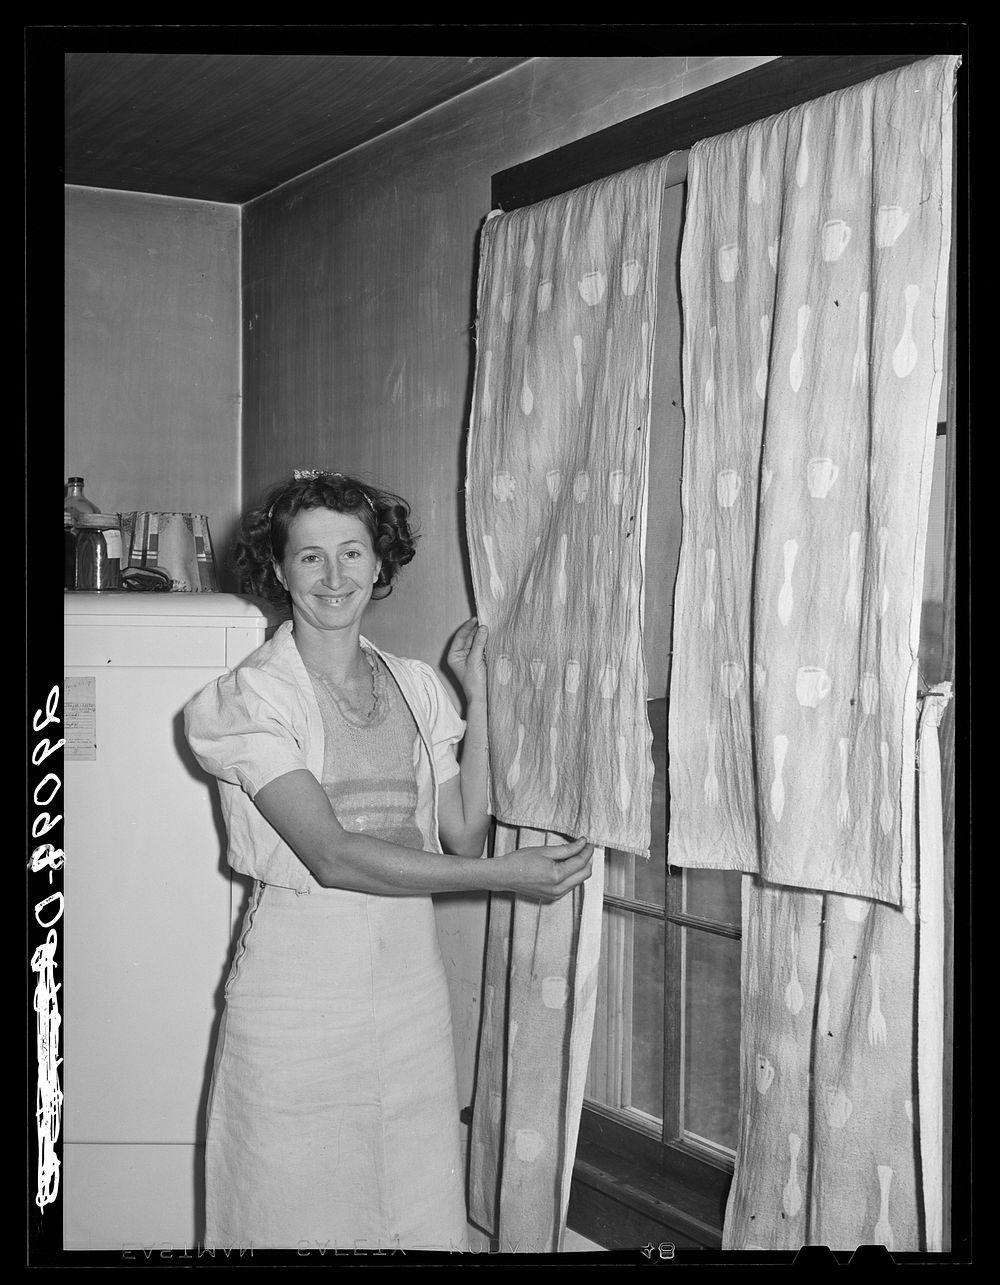 The FSA (Farm Security Administration) home supervisor has helped this woman make her dress of flour sacks and decorate her…